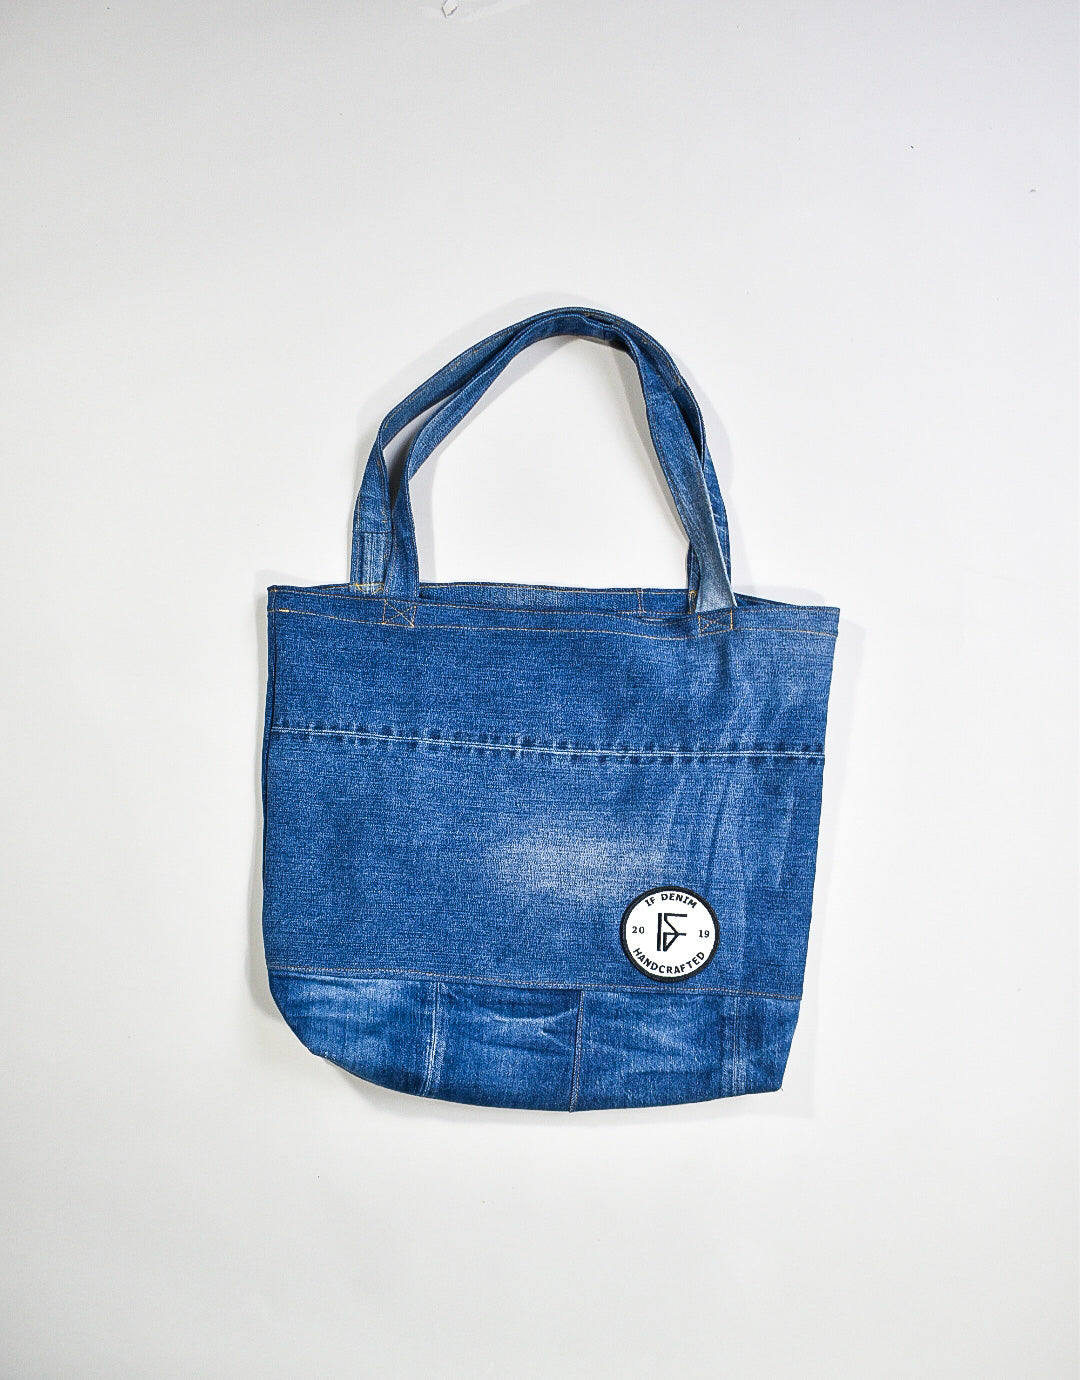 IF DENIM | Sustainable Handcrafted Totebag Worn-out Stone Washed